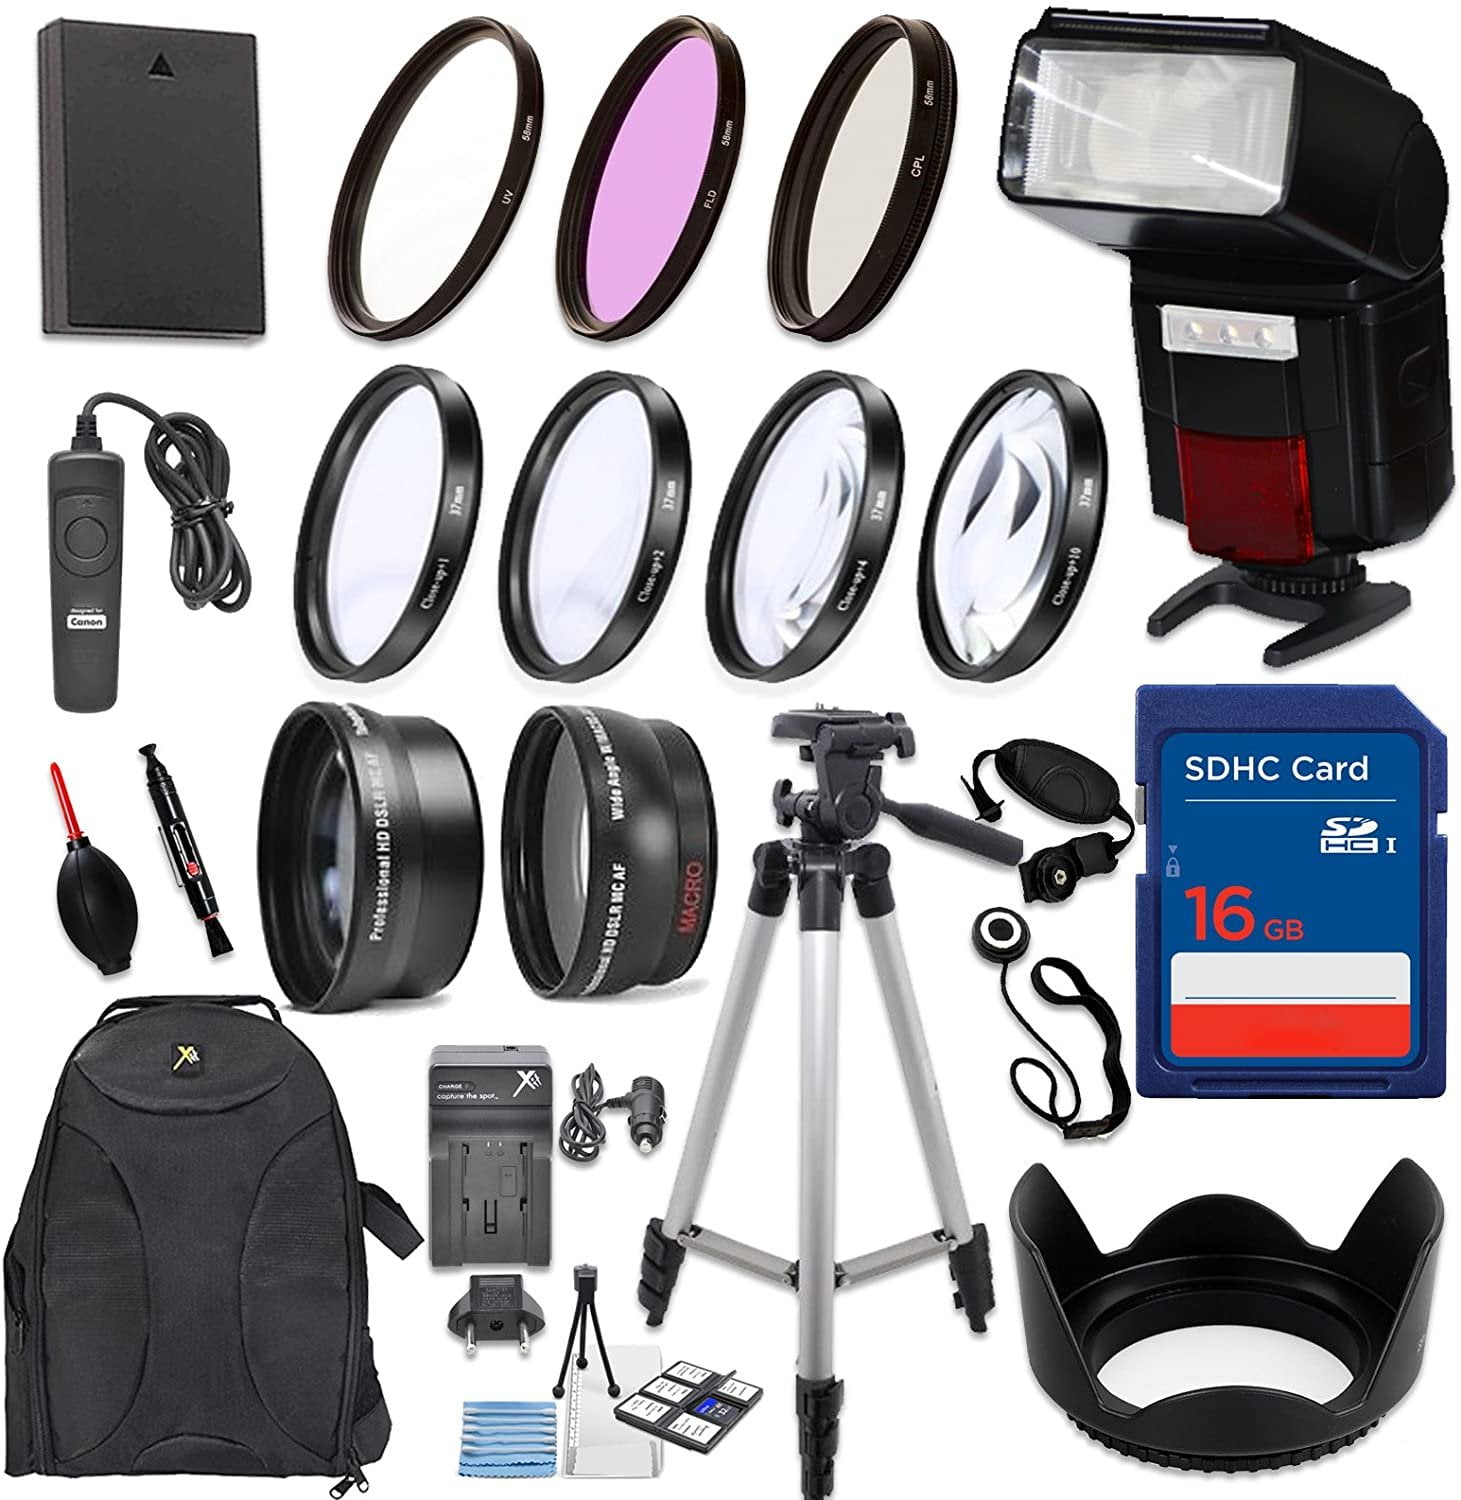 saai Doorbraak Ellende 58mm 17 Piece Accessory Kit for Canon EOS Rebel T6, T5, T3, 1300D, 1200D,  1100D DSLRs with Replaceable LP-E10 Battery, Automatic LED Flash, 16GB  Memory, HD Filters, Backpack, Auxiliary Lenses & More -